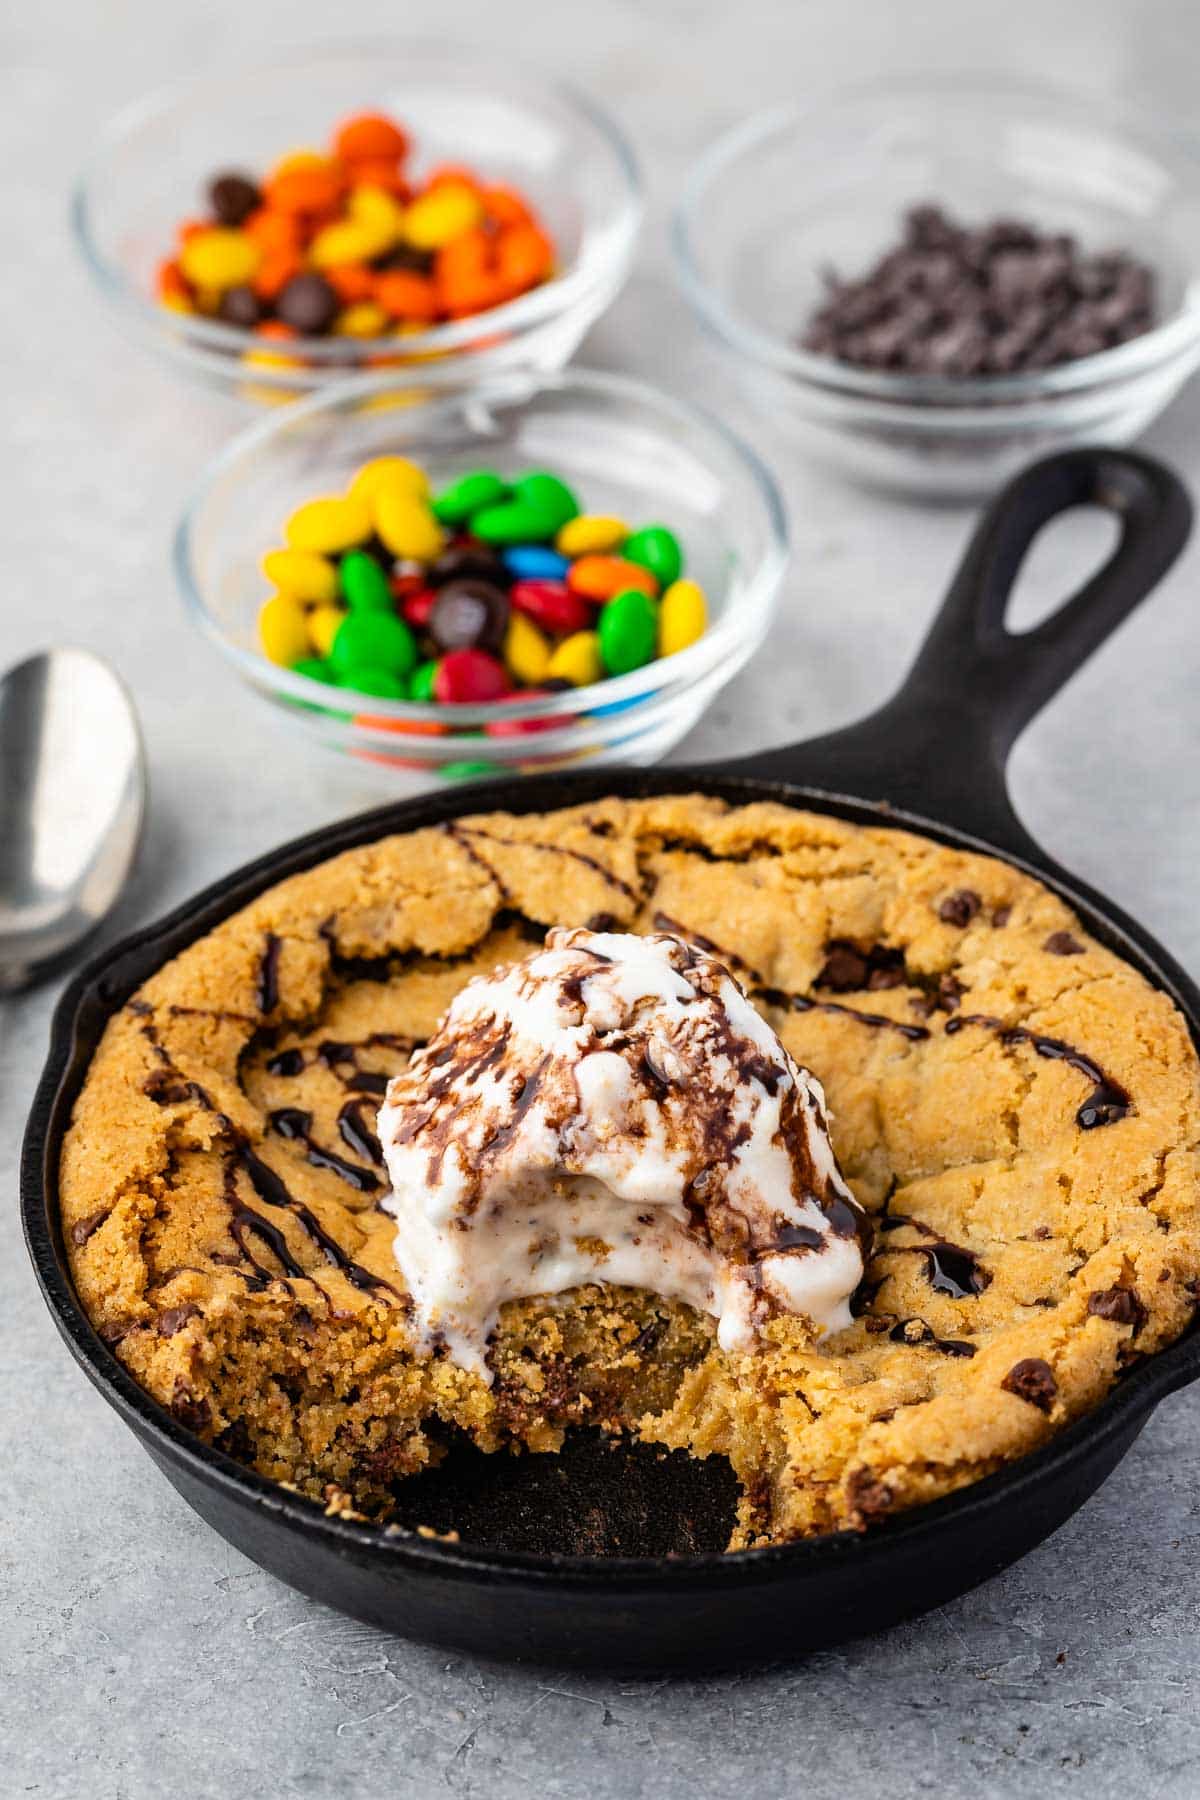 The Modern Gourmet small cast iron skillet baking kit chocolate chip cookie